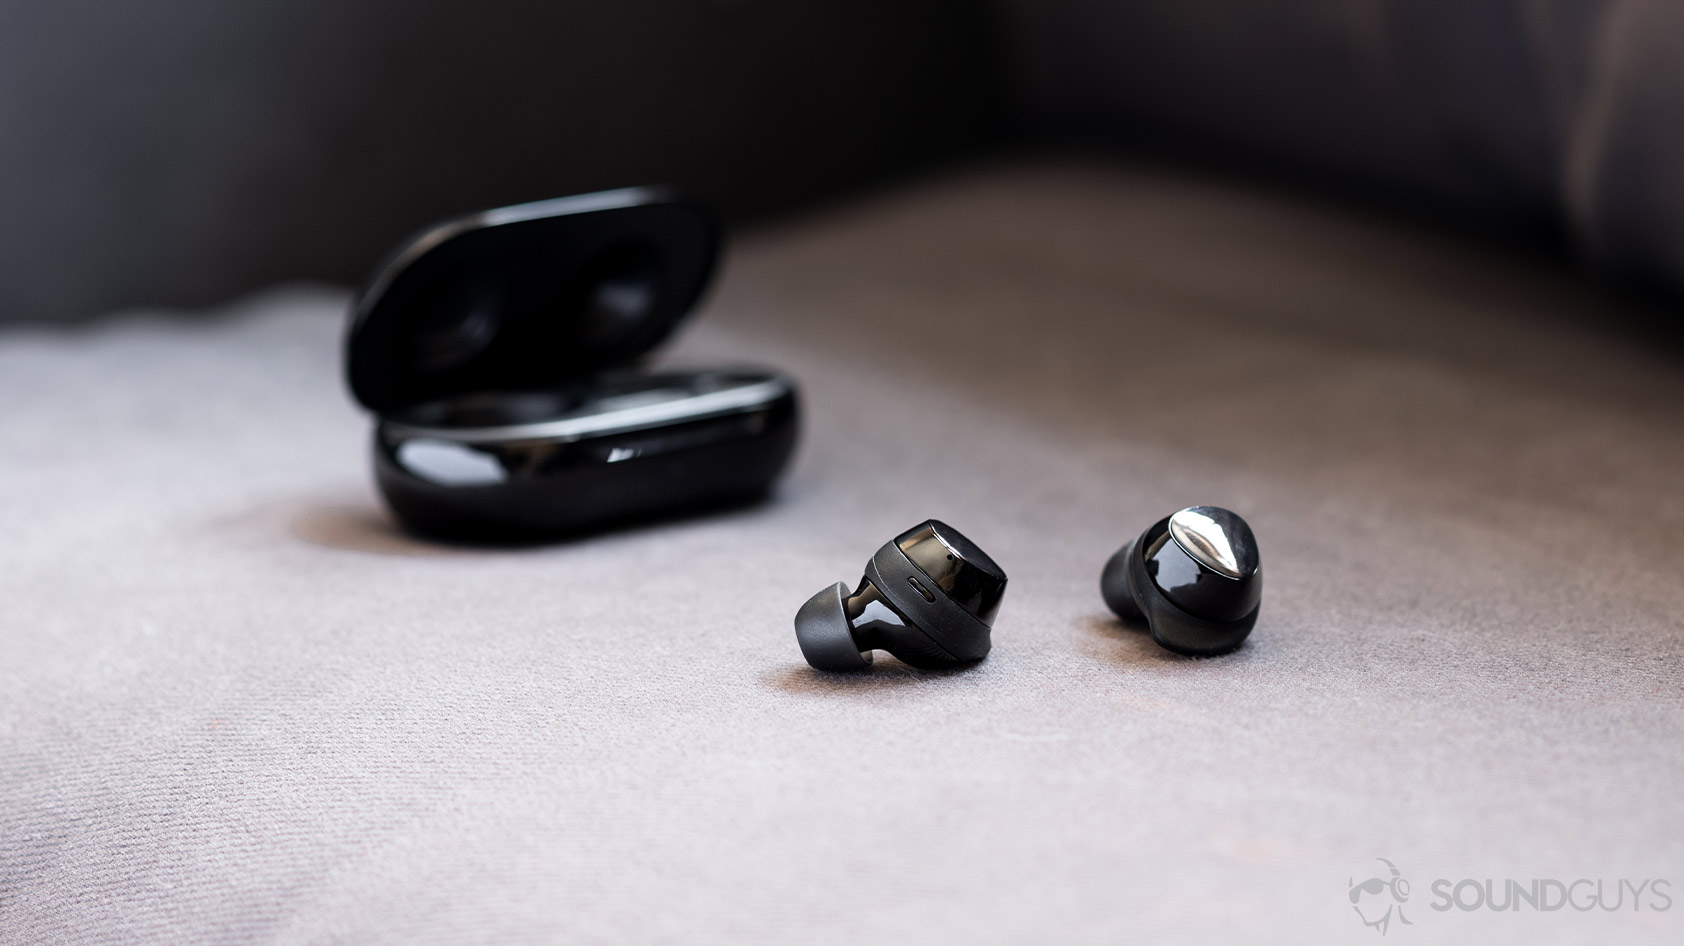 A picture of the Samsung Galaxy Buds Plus earbuds out and in front of the case, which is open in the background for the Samsung Galaxy Buds Plus vs Samsung Galaxy Buds Live comparison.